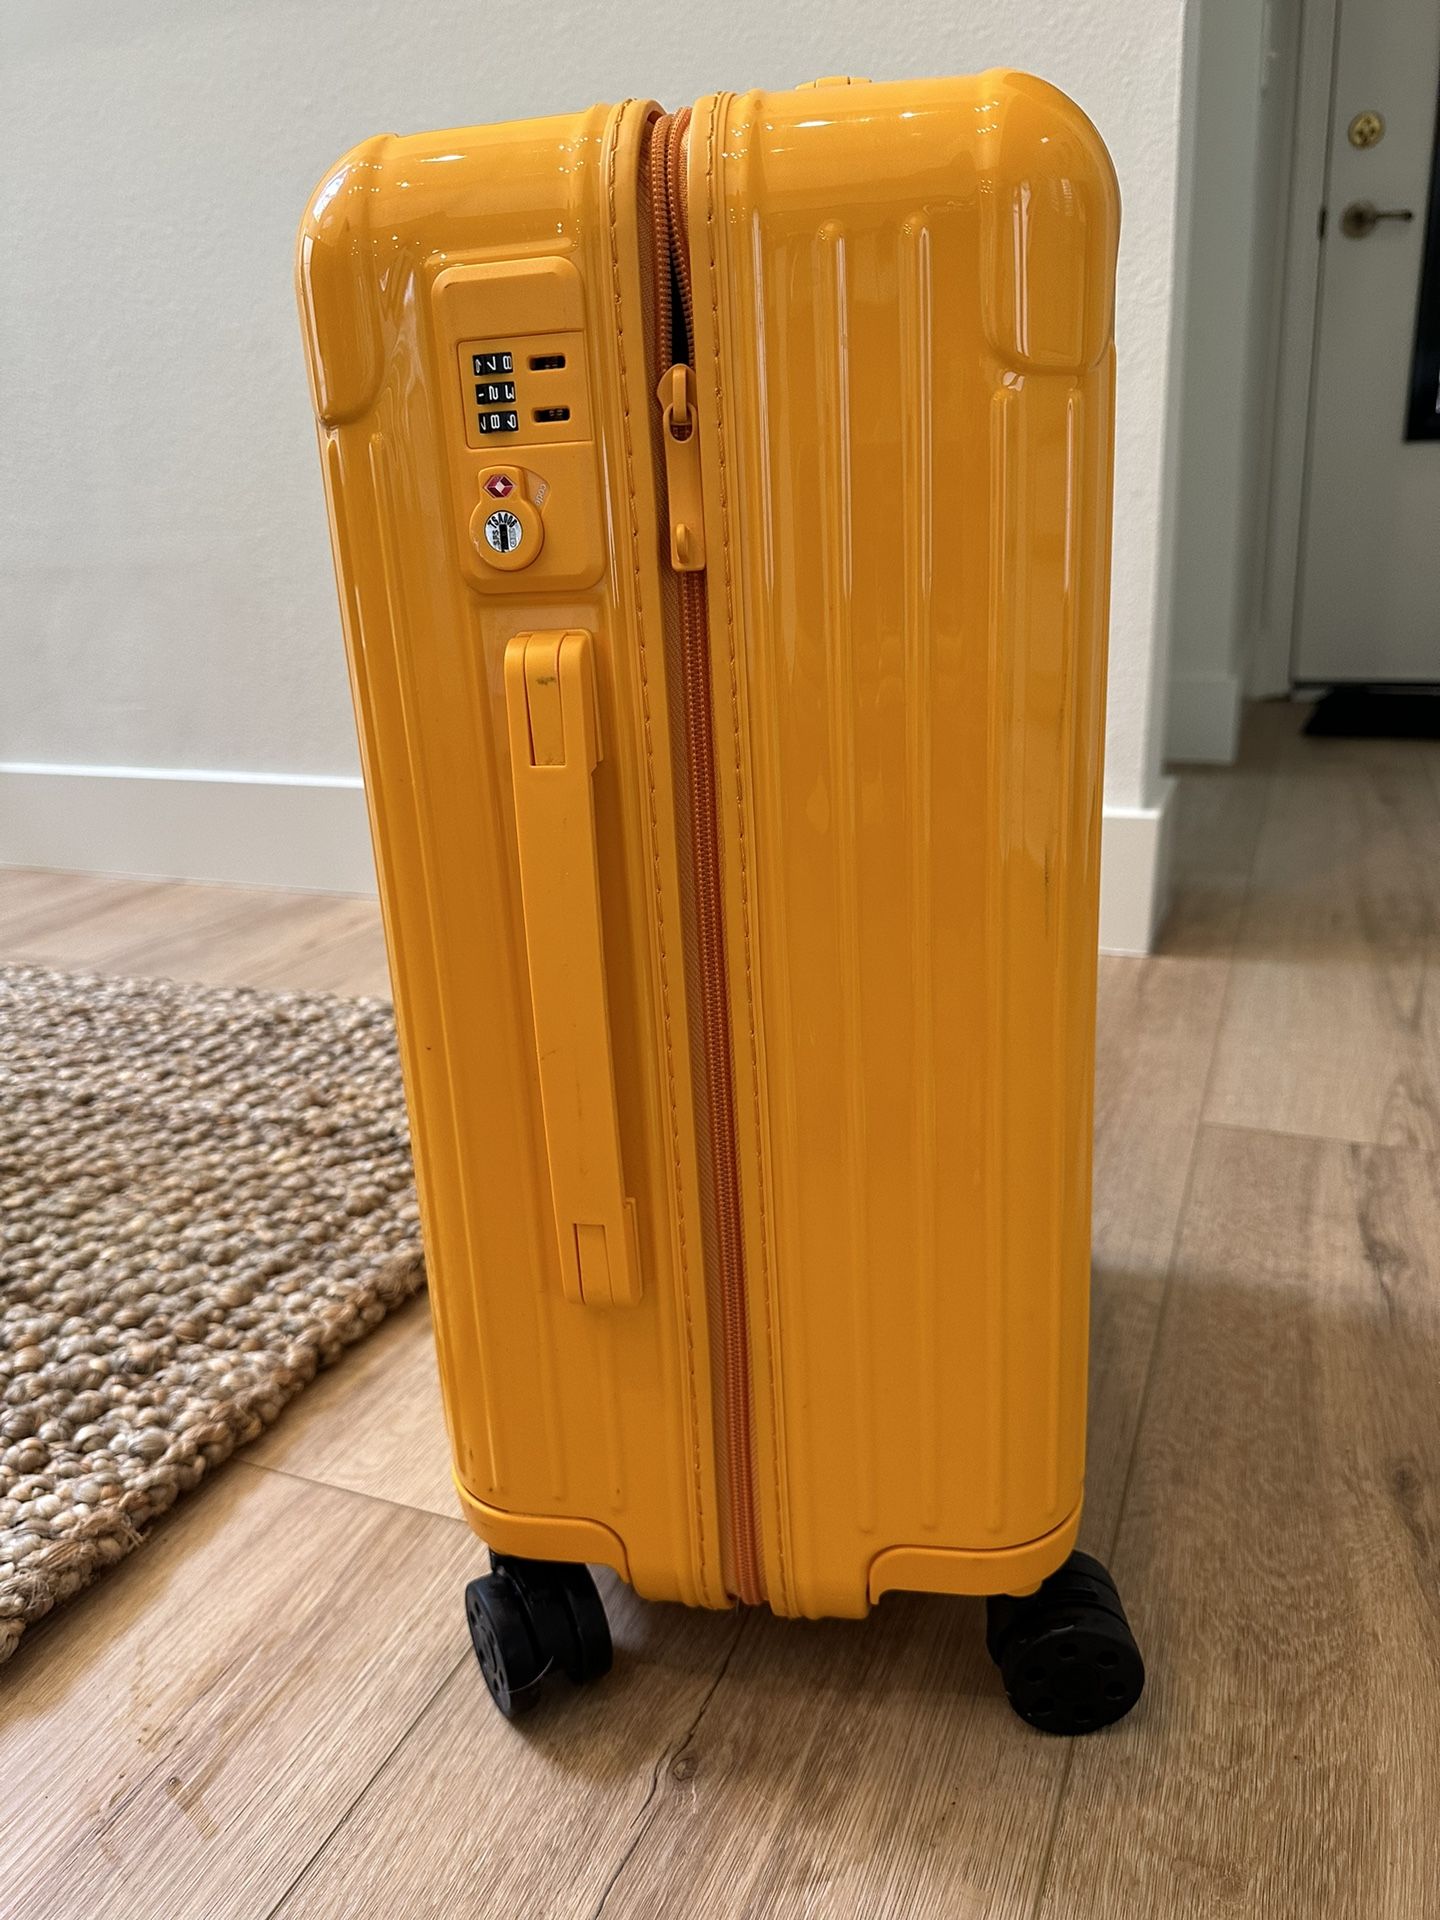 RIMOWA Essential Check In Desert Rose 85L Suit case Travel for Sale in West  Covina, CA - OfferUp